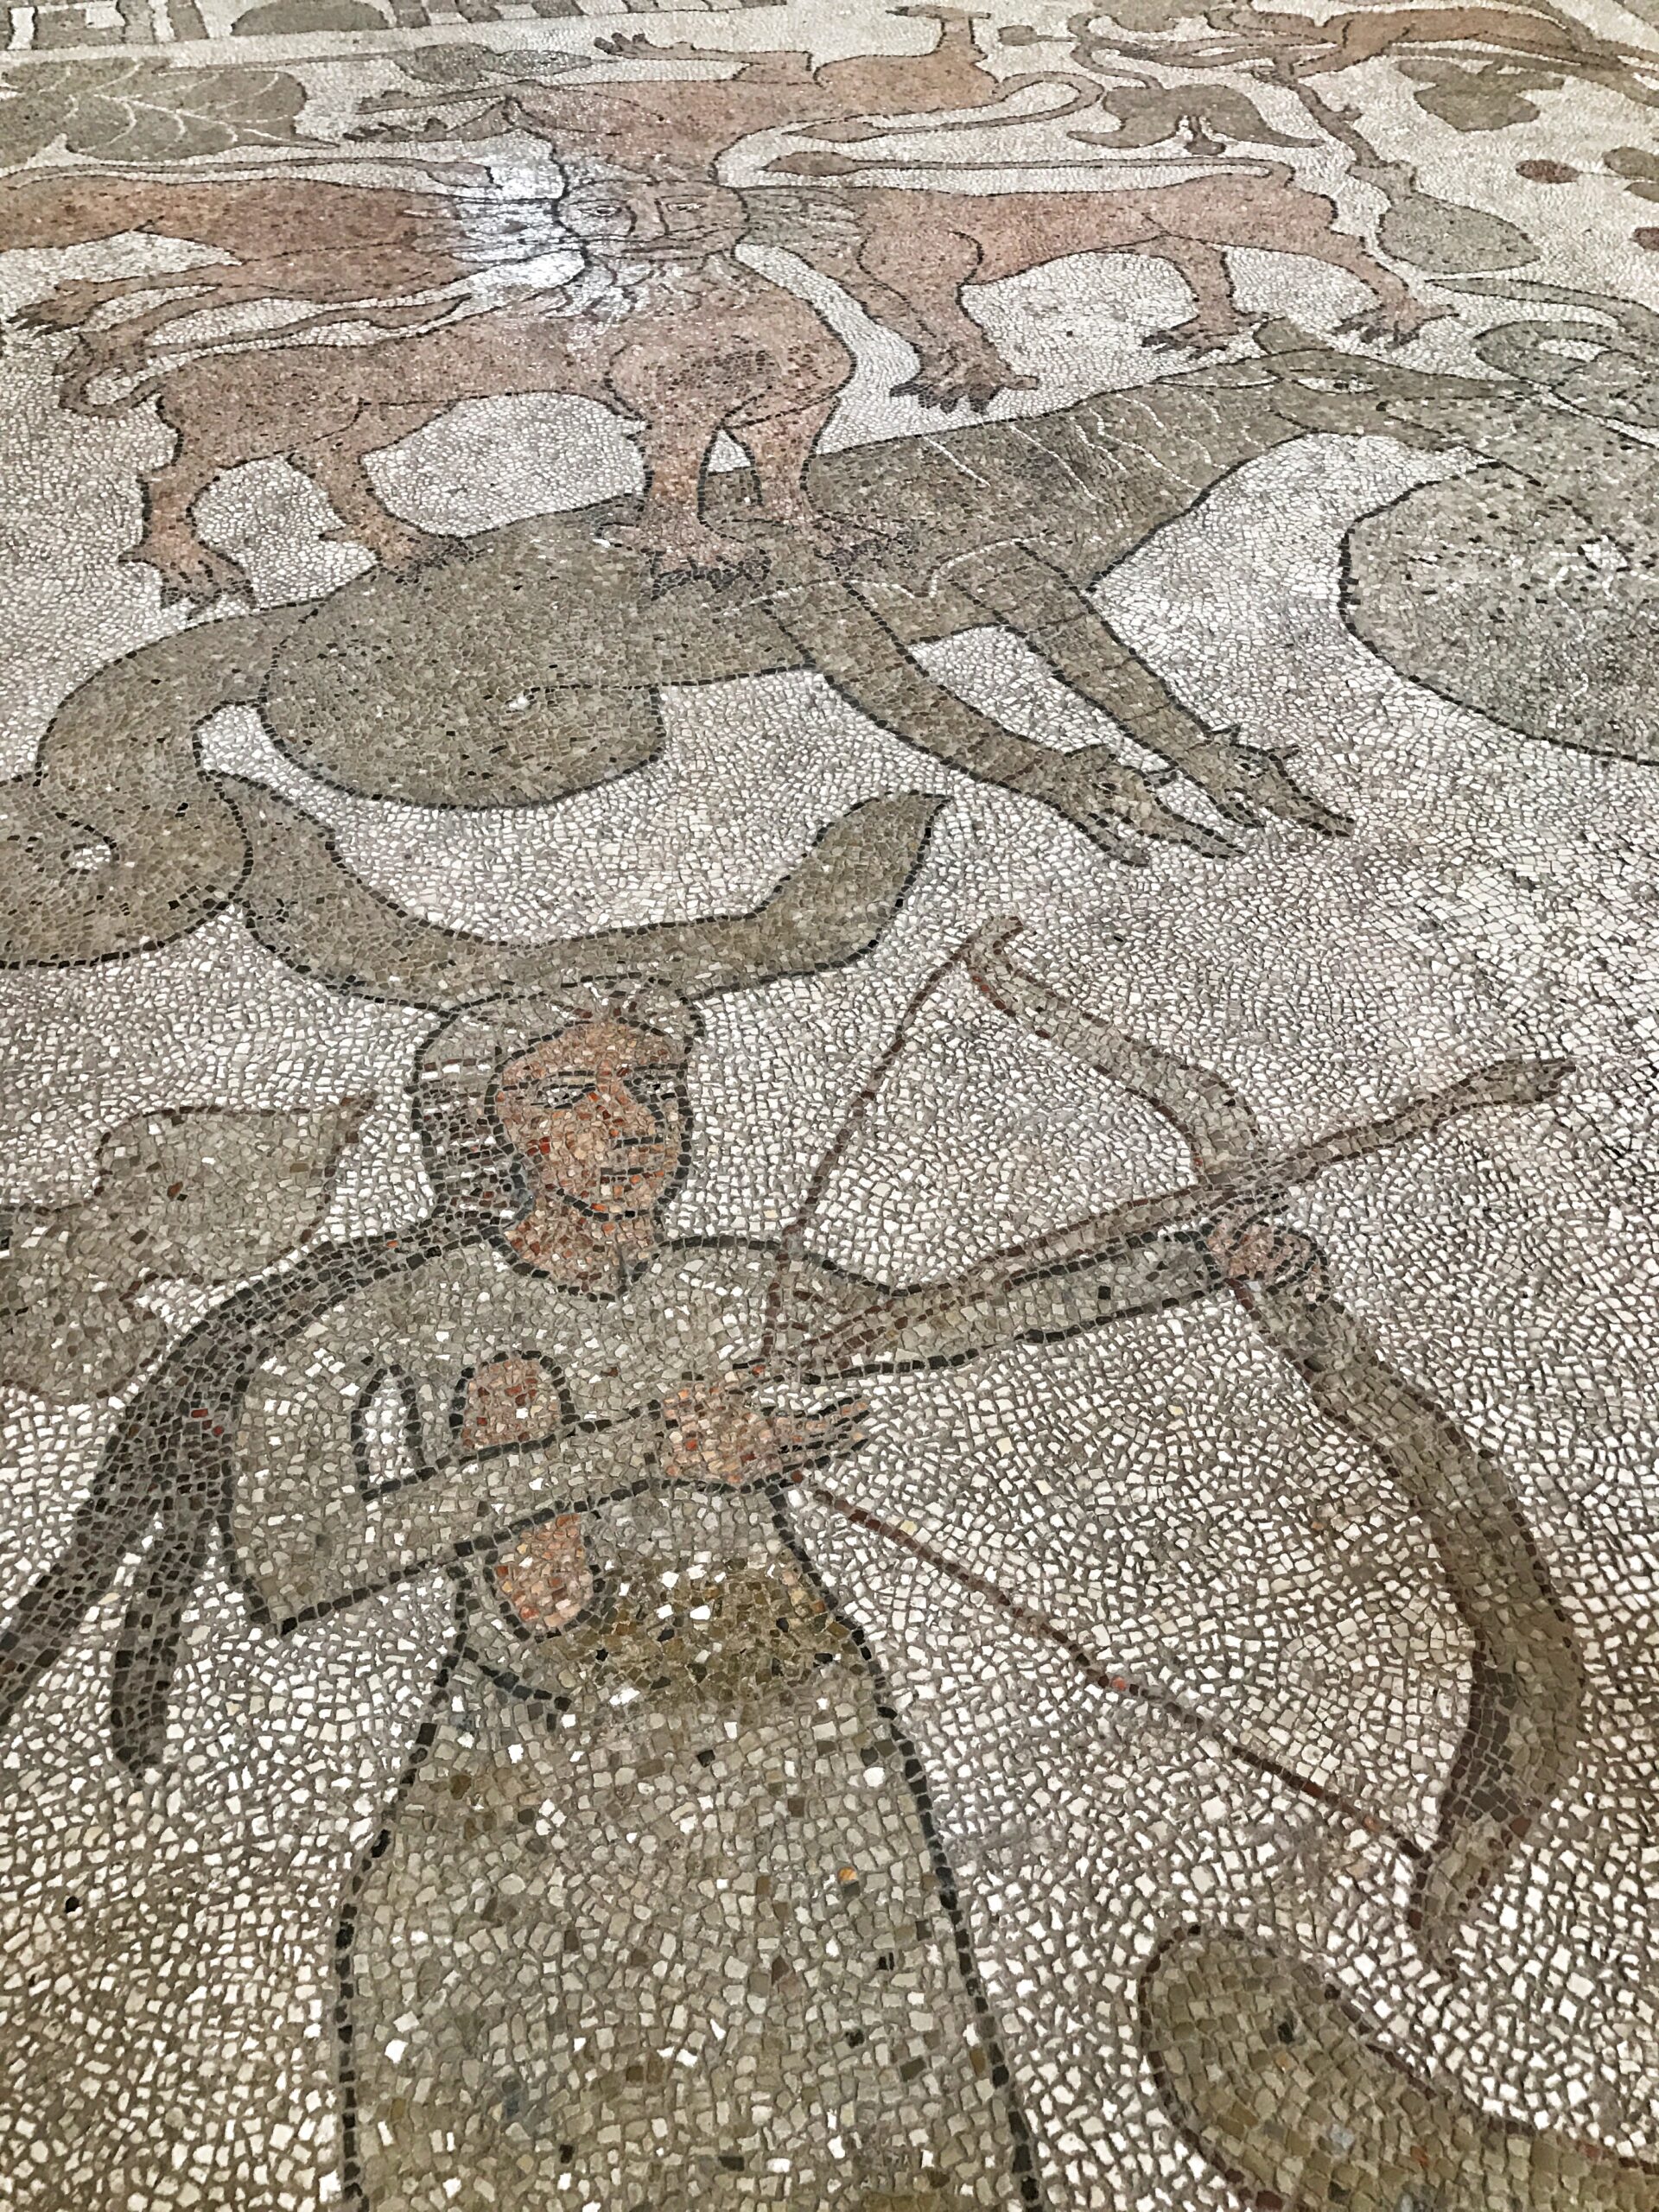 The mosaic floor at the cathedral in Otranto Puglia is impressive.